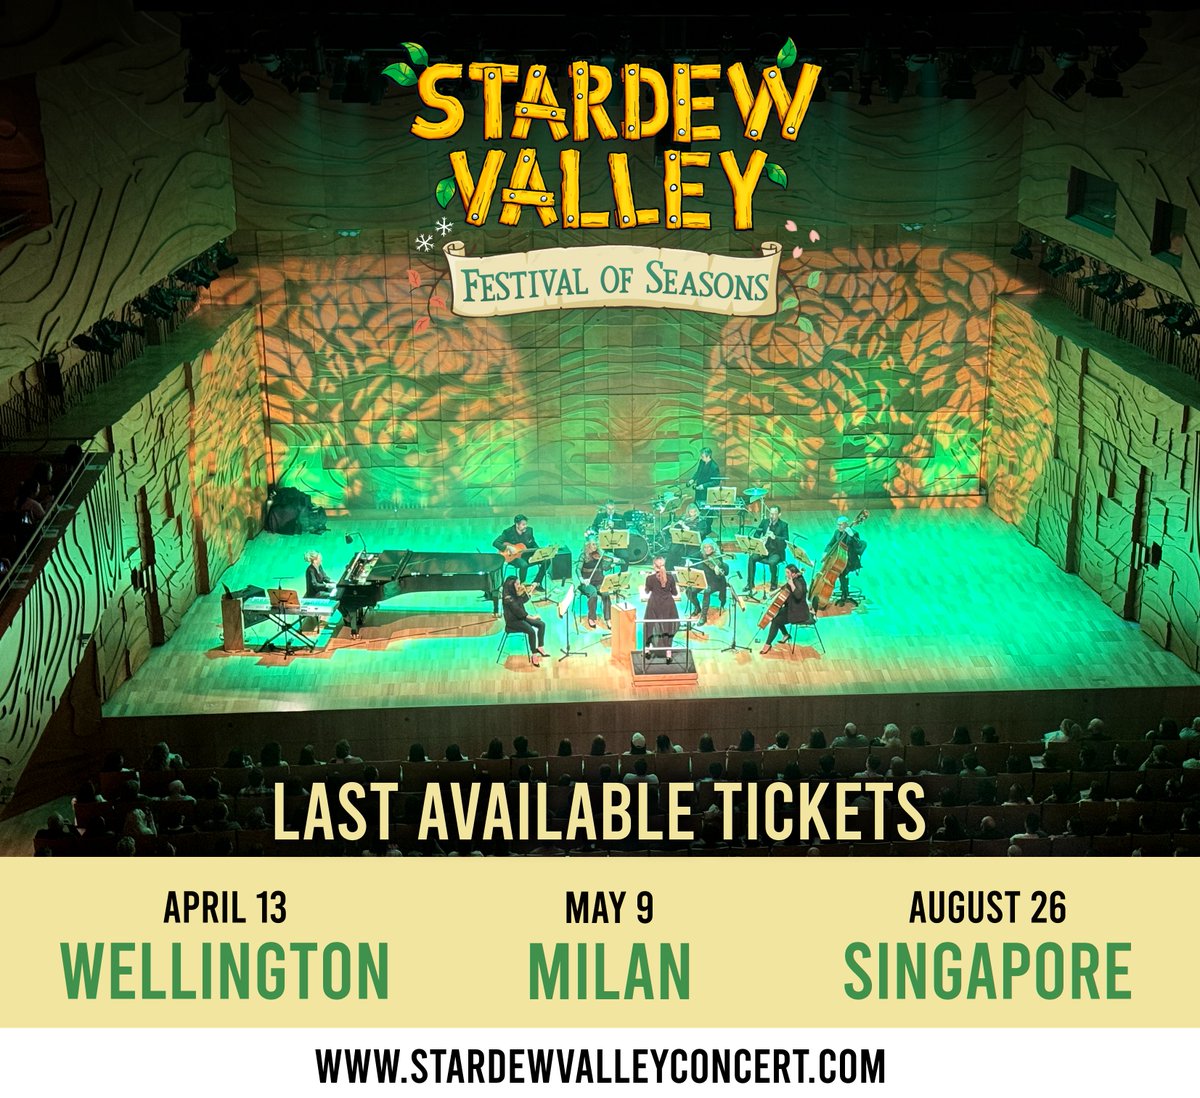 The Wellington, Milan, and Singapore concerts are the last chance to get tickets to the Festival of Seasons tour. All remaining dates are sold out. 🇳🇿🇮🇹🇸🇬 Grab tickets before they are gone at stardewvalleyconcert.com